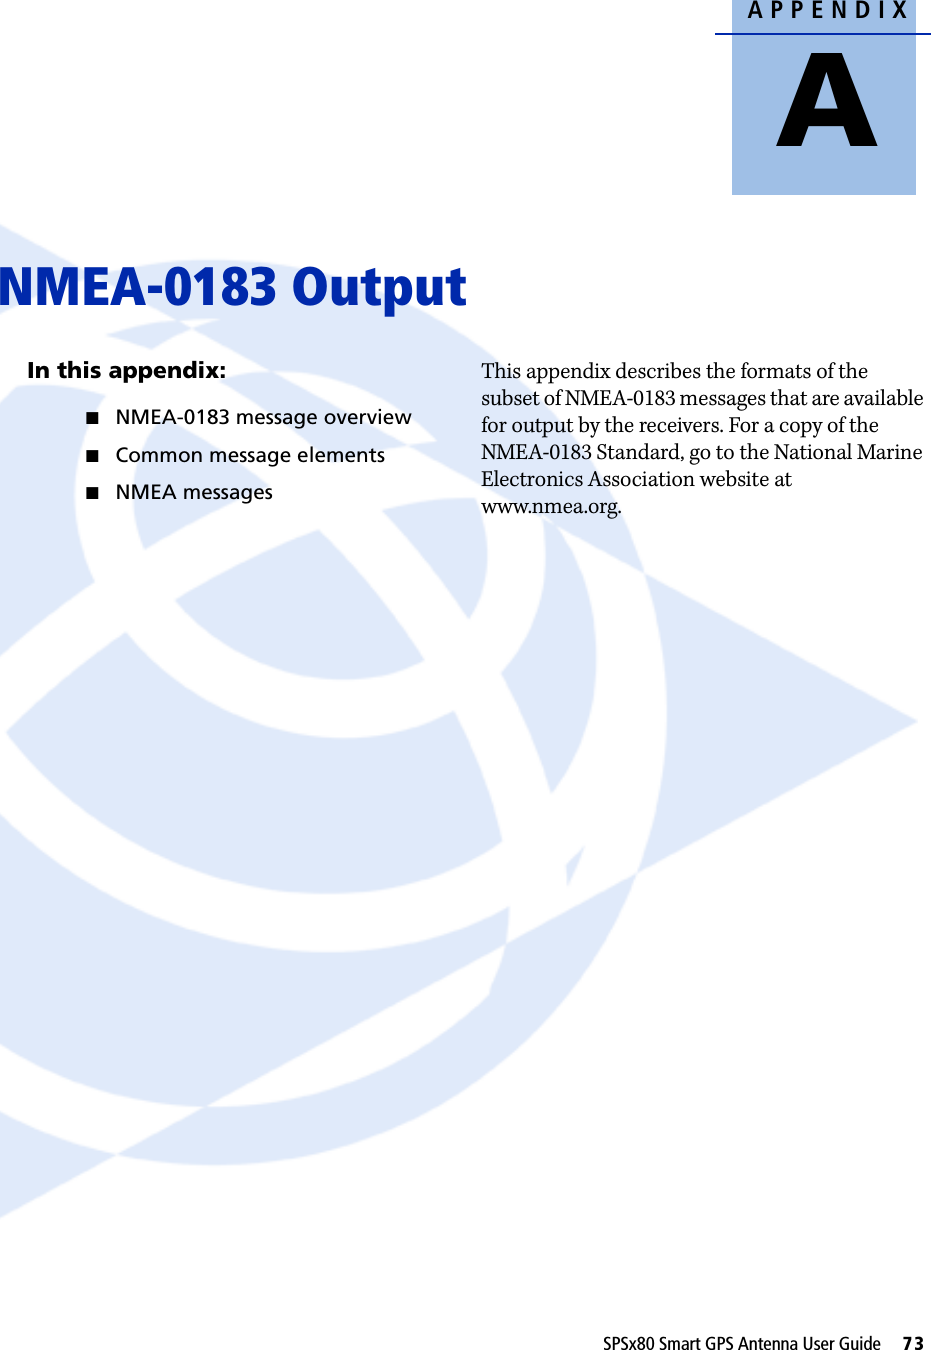 APPENDIXASPSx80 Smart GPS Antenna User Guide     73NMEA-0183 Output AIn this appendix:QNMEA-0183 message overviewQCommon message elementsQNMEA messagesThis appendix describes the formats of the subset of NMEA-0183 messages that are available for output by the receivers. For a copy of the NMEA-0183 Standard, go to the National Marine Electronics Association website at www.nmea.org.